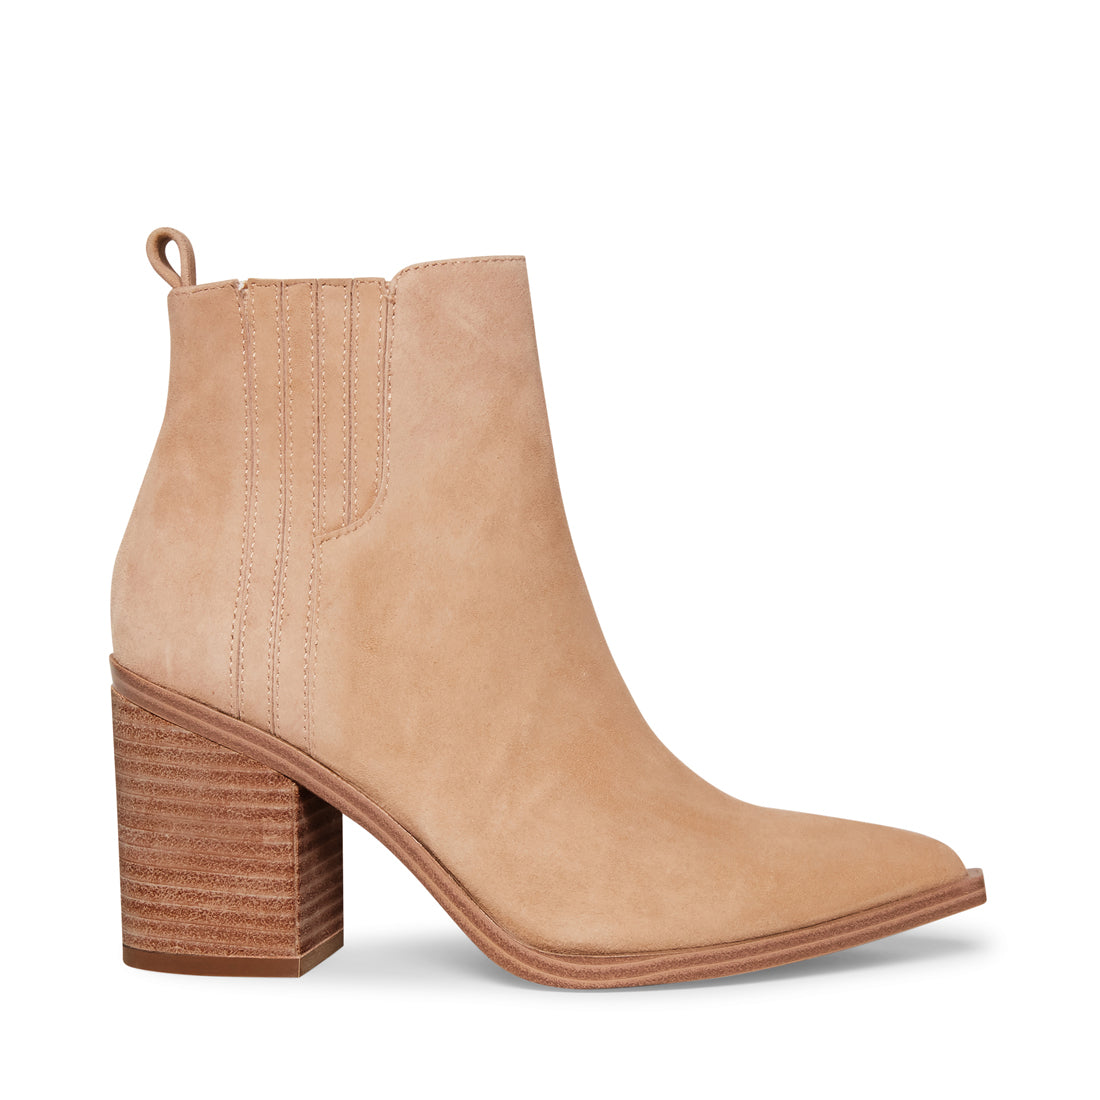 booties online shopping